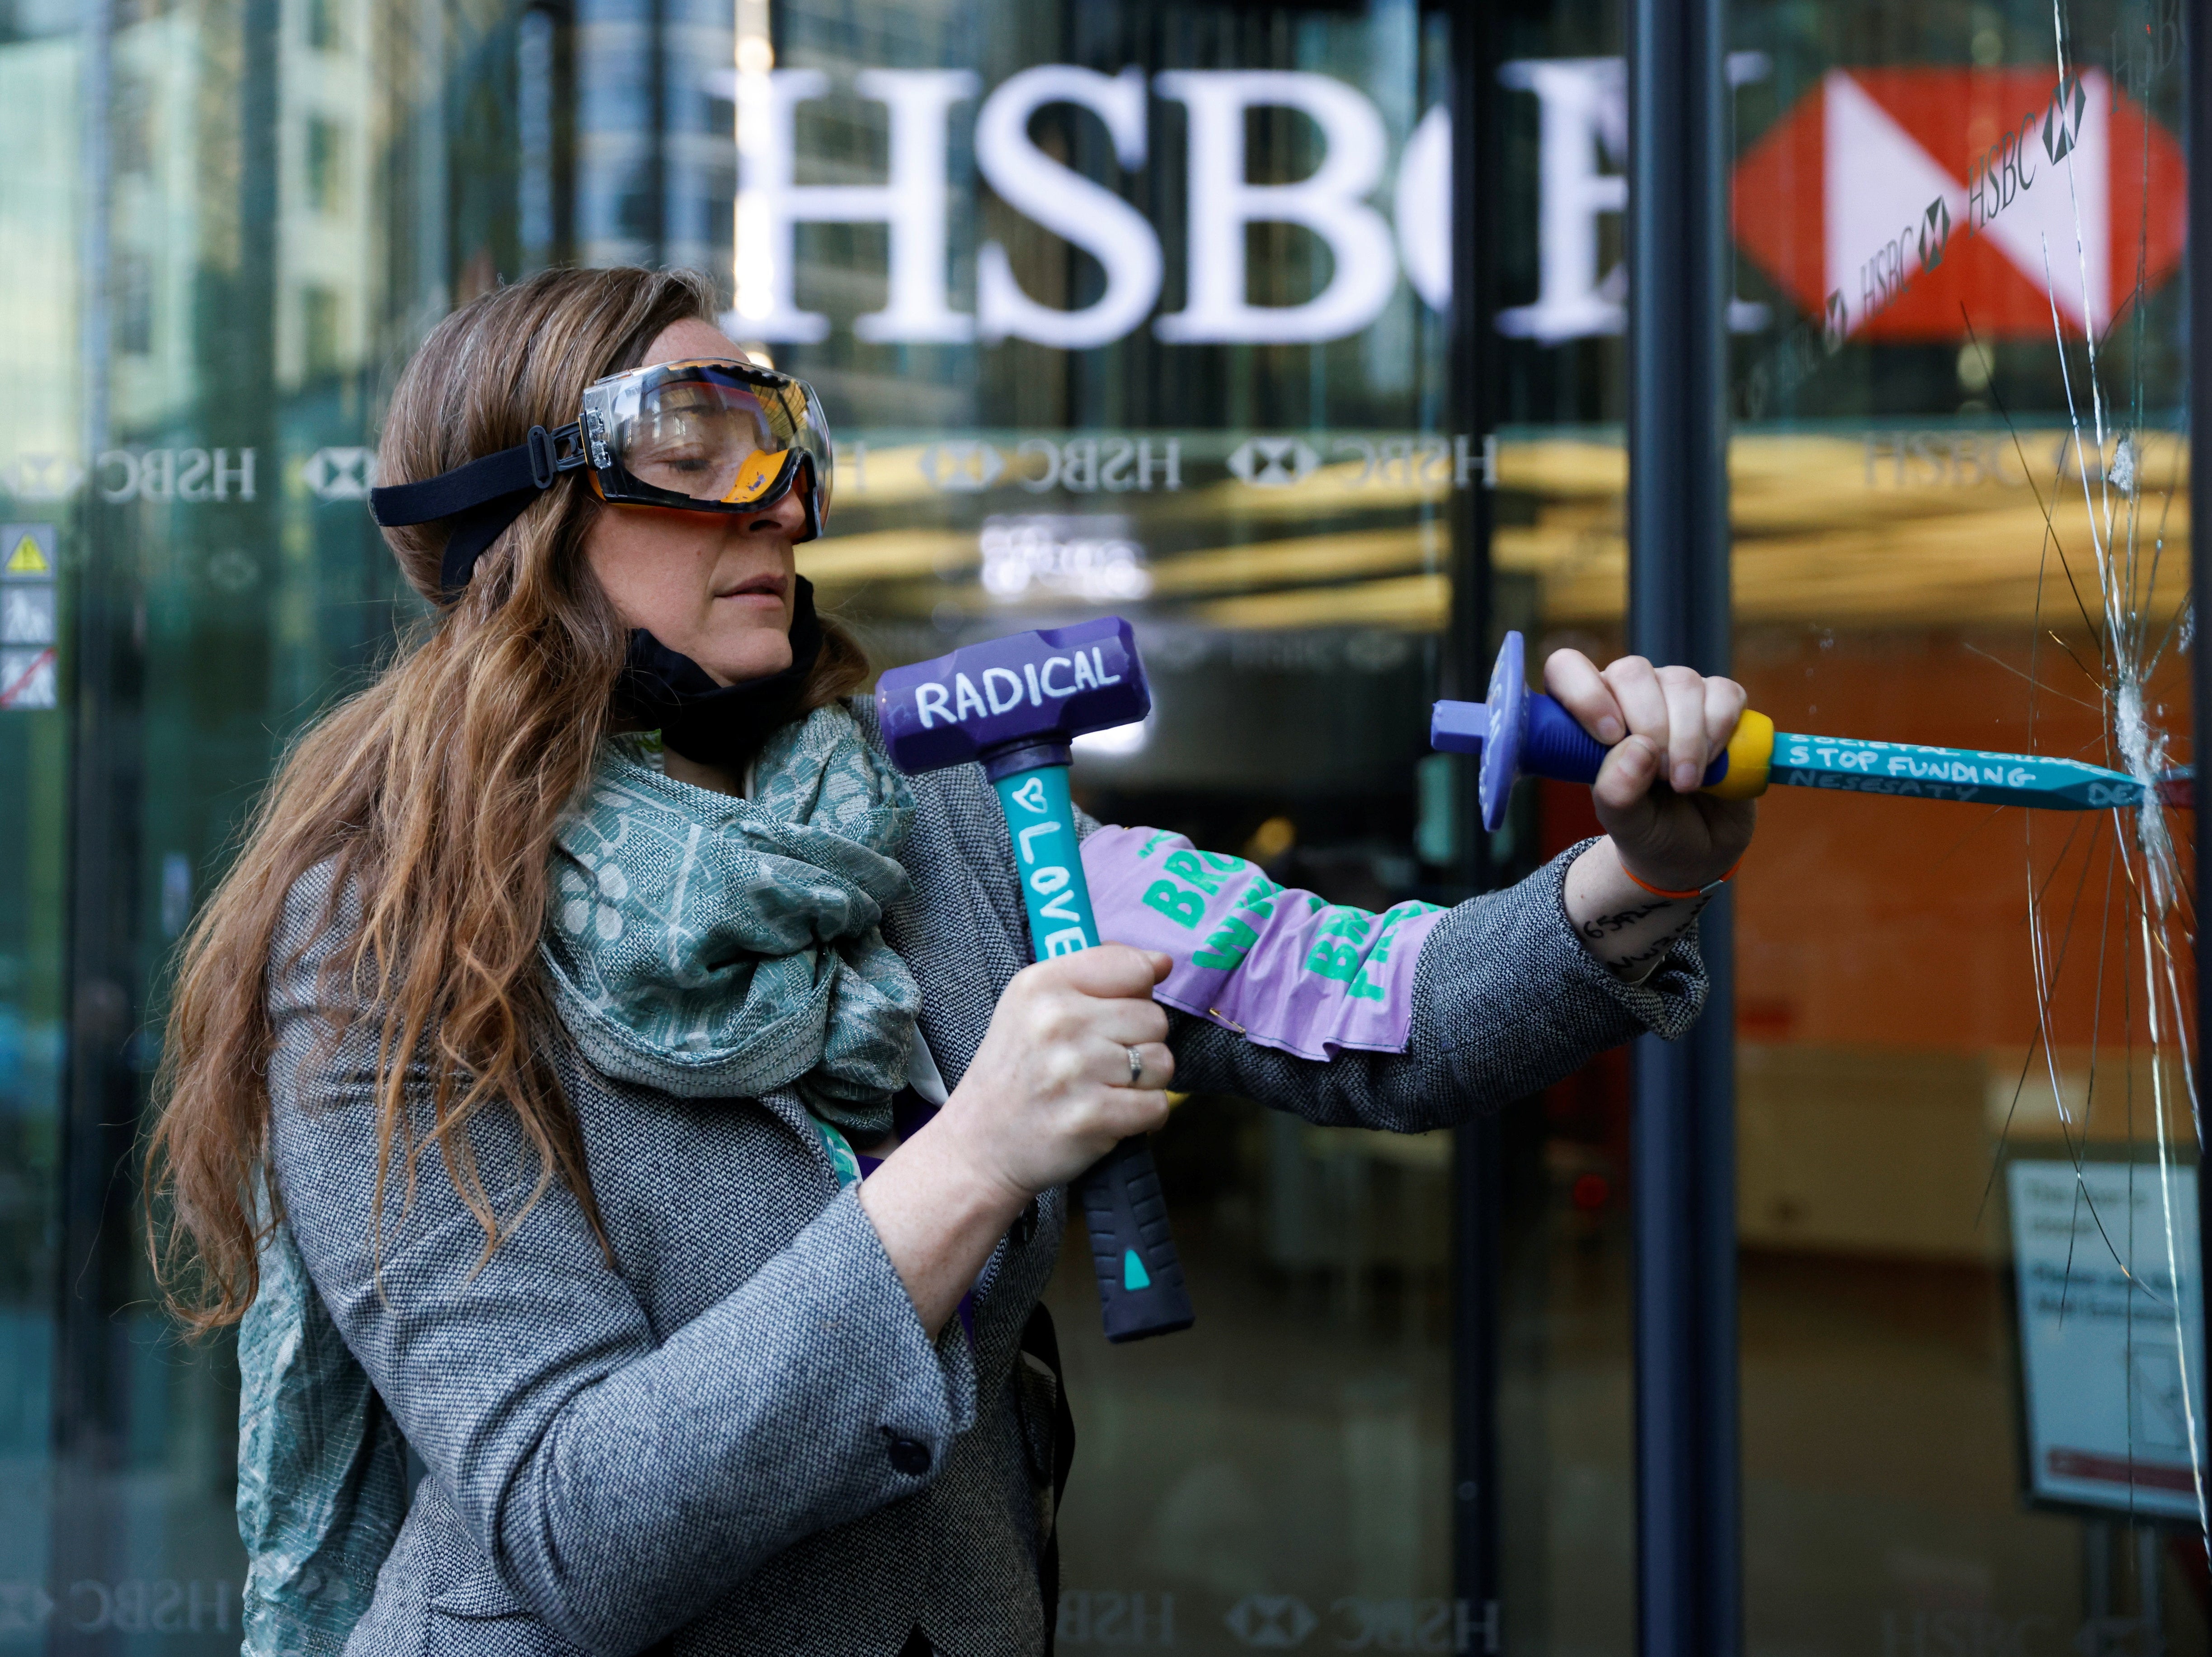 HSBC has been targeted by activists over its financial support for fossil fuels